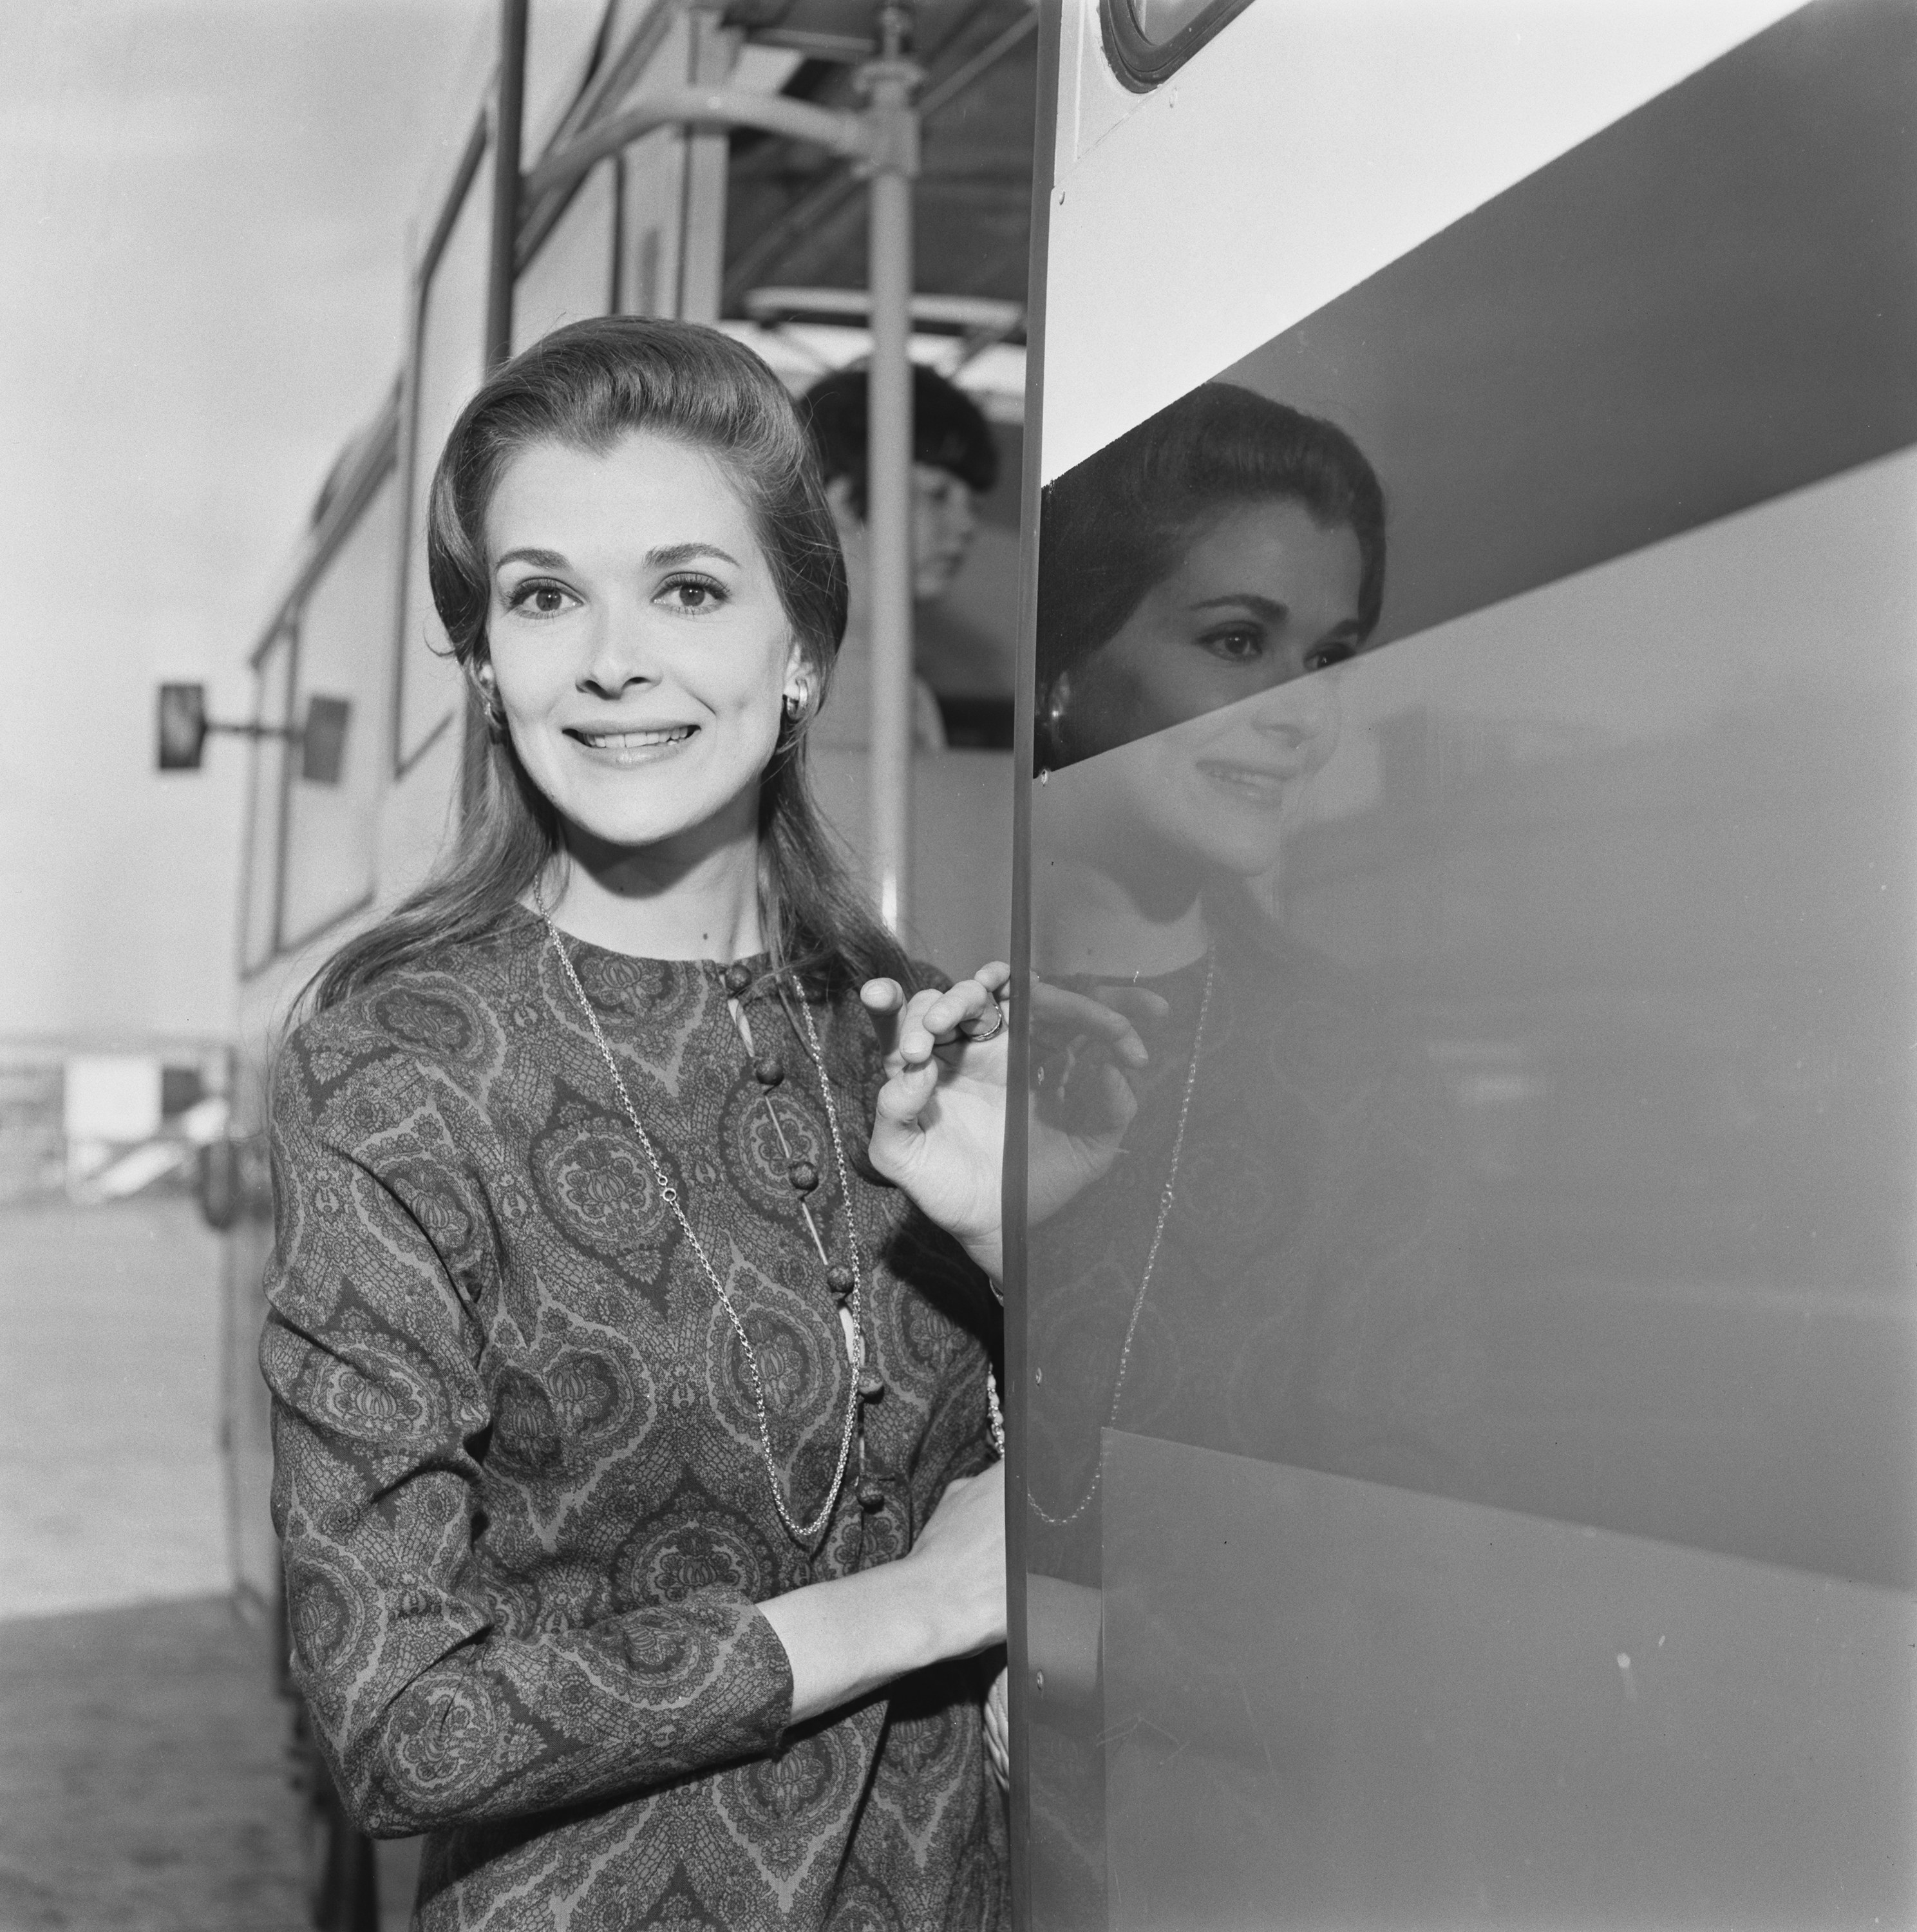 Jessica Walter in a paisley dress leaning out of a bus